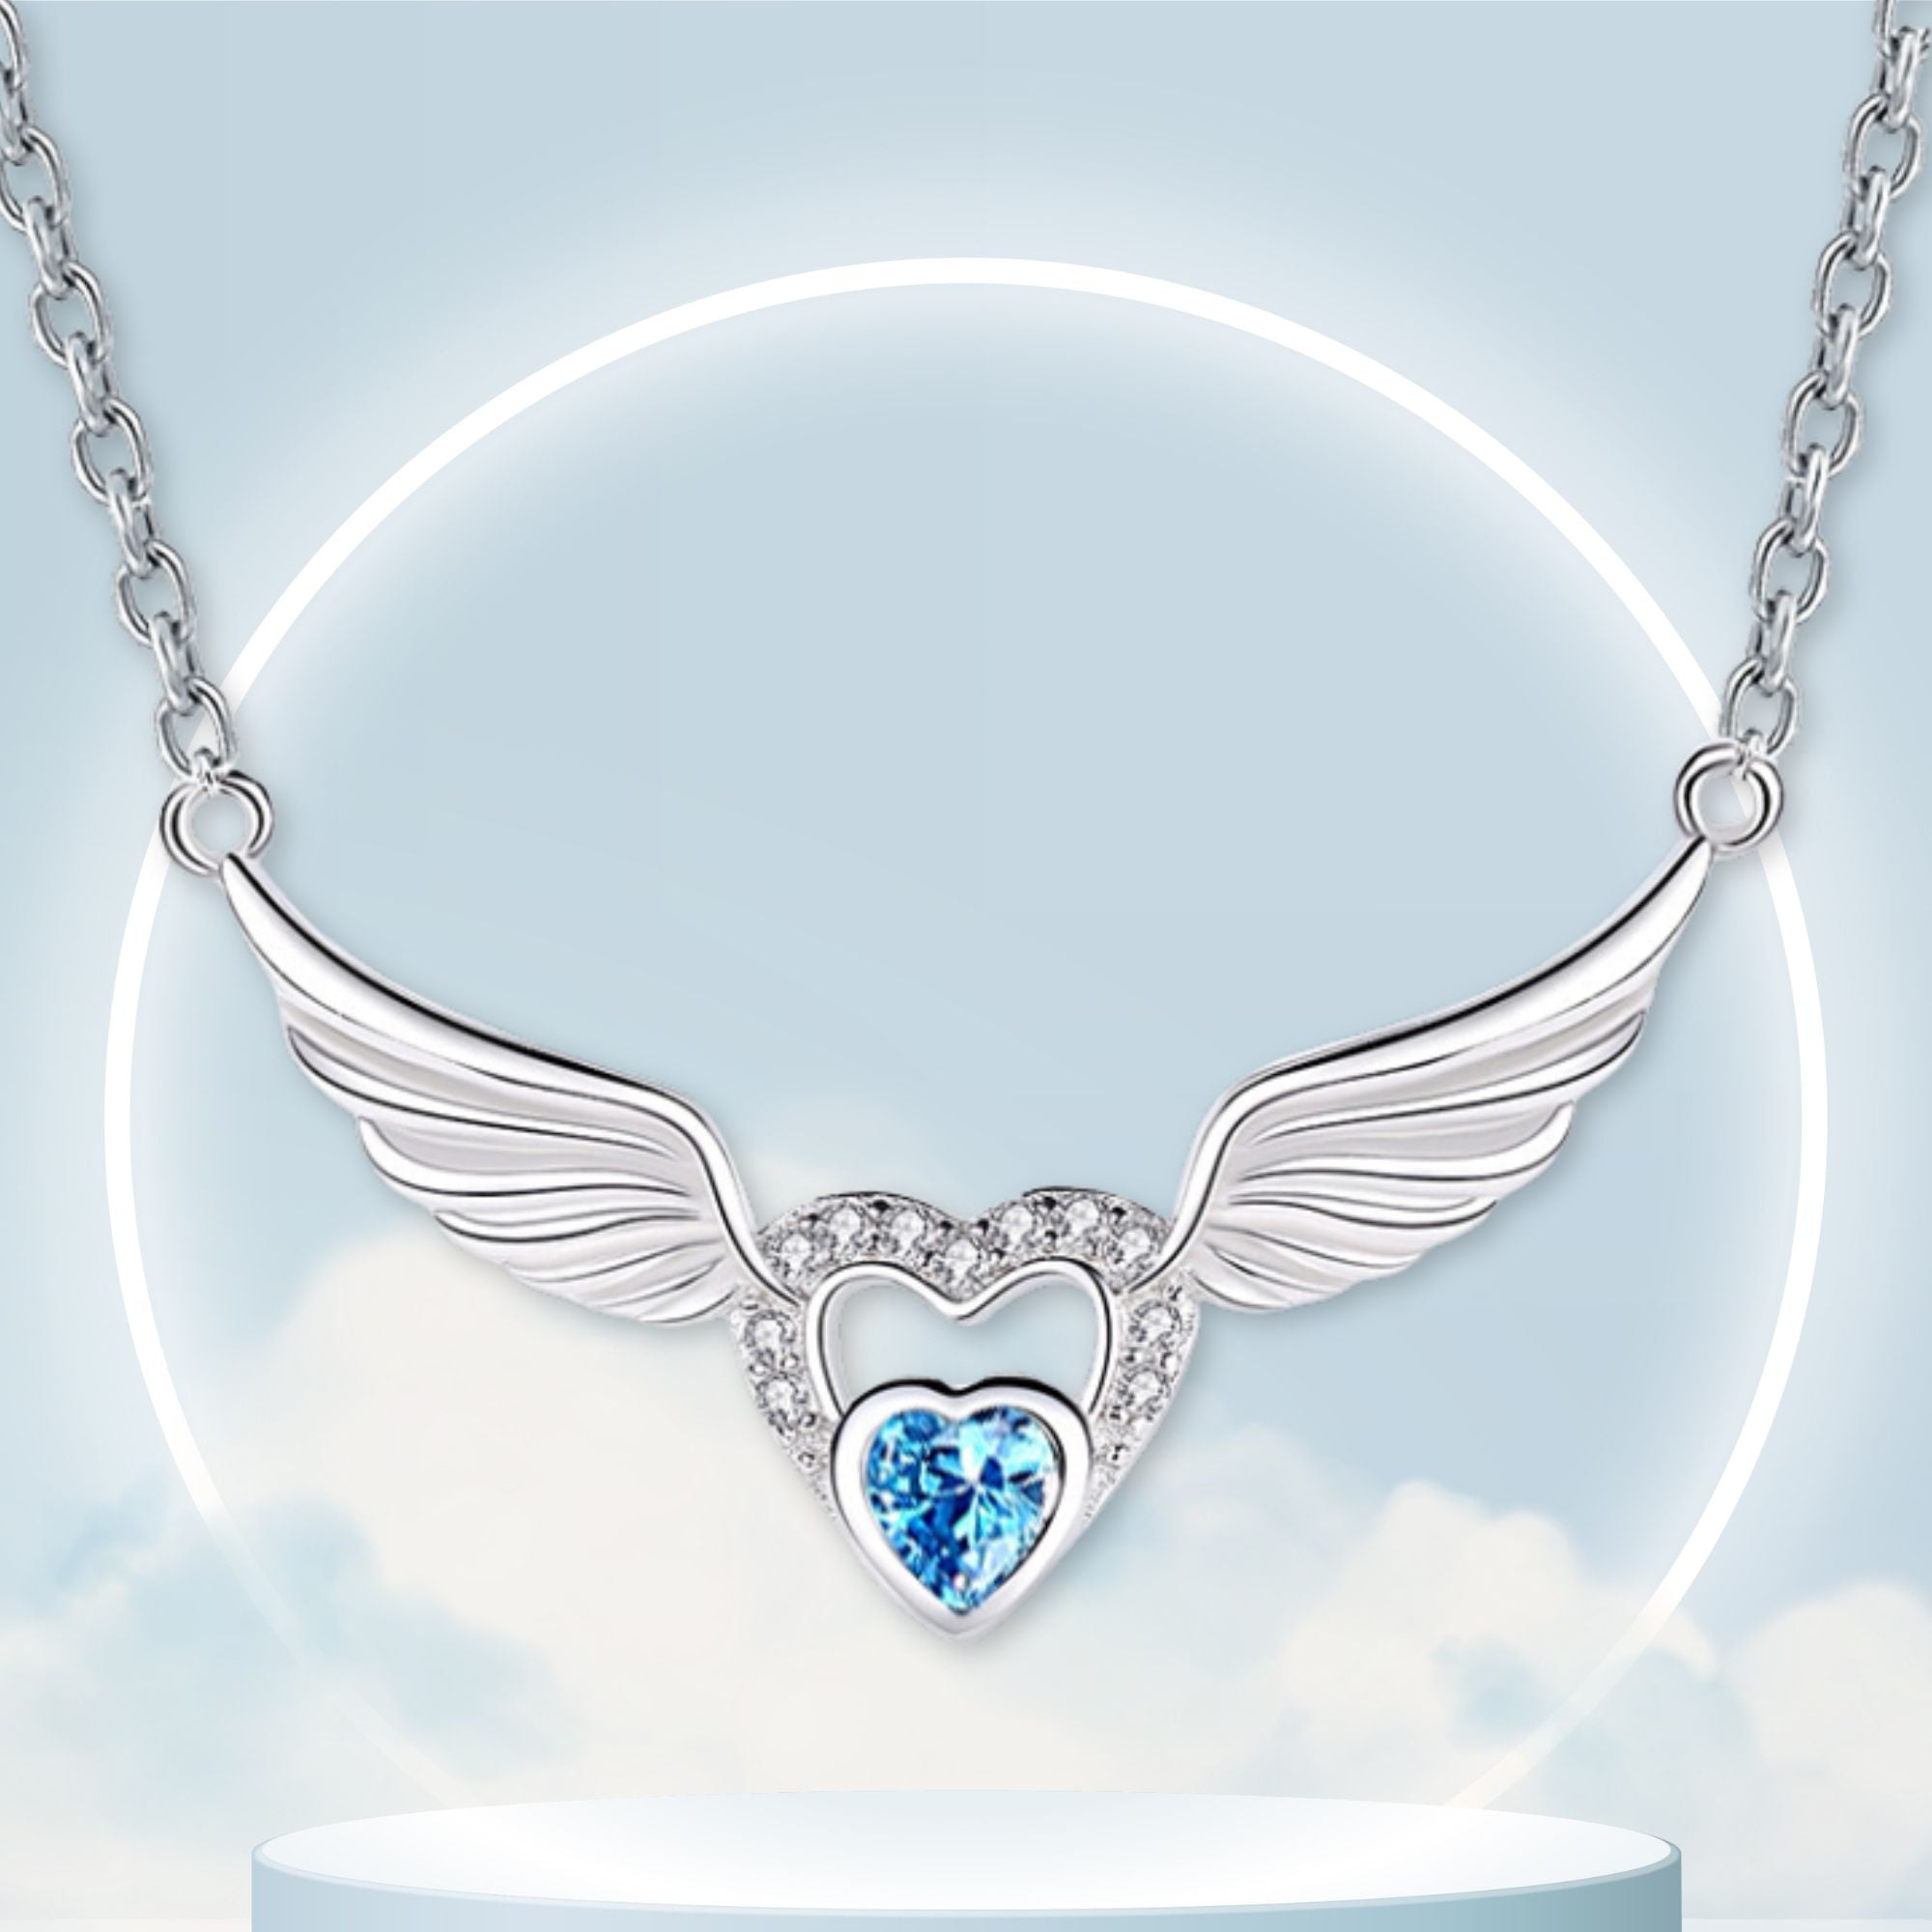 Angel Wings and Heart Sterling Silver Pendant - Clear, Blue or Red Color: White Jesus Passion Apparel